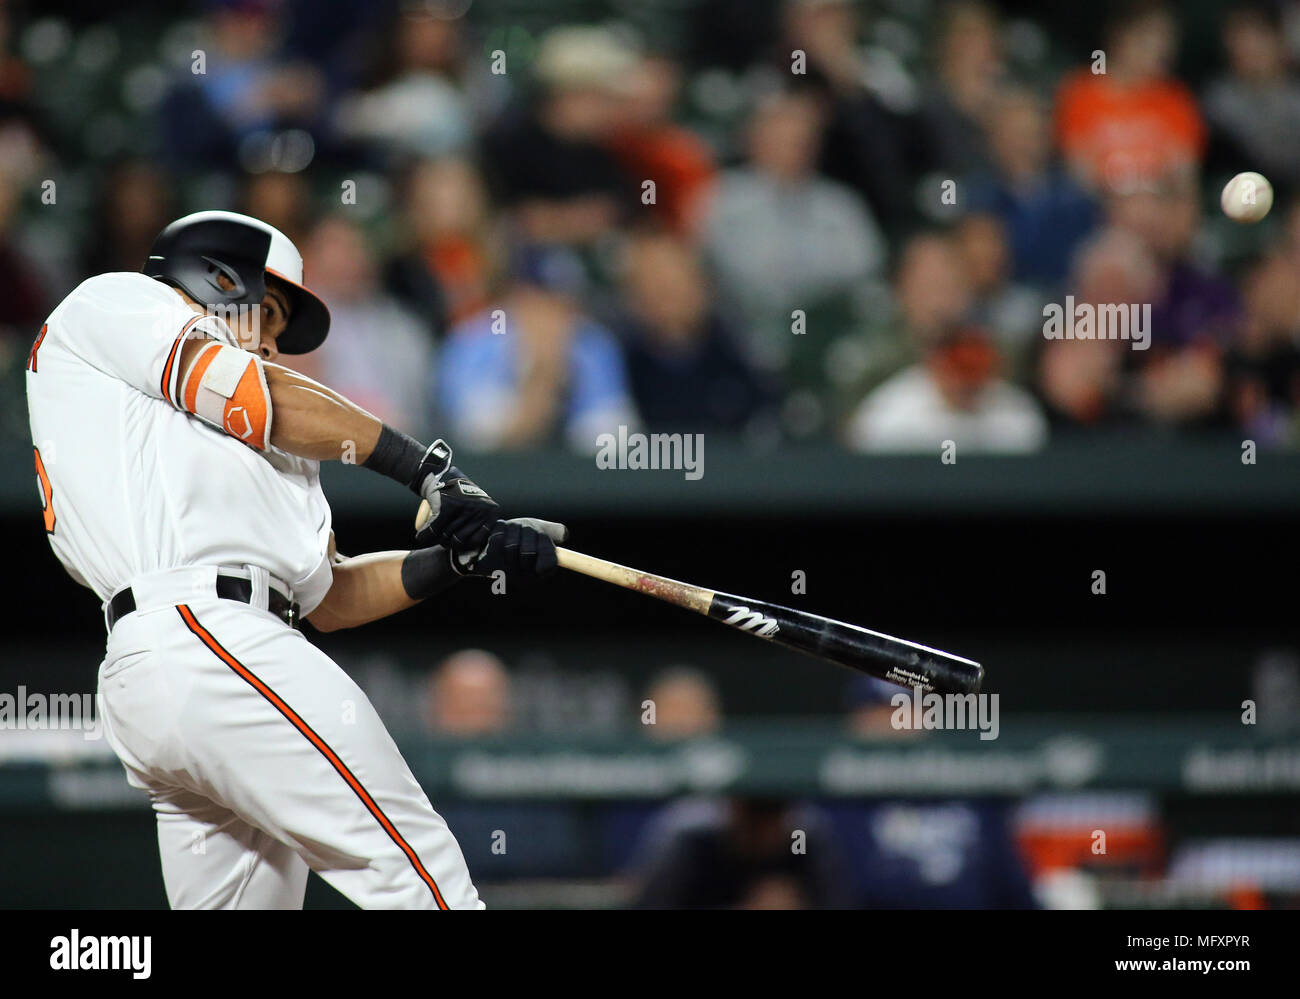 Baltimore, Maryland, USA. 26th Apr, 2018. Baltimore Orioles right fielder Anthony Santander (25) in action during a match between the Baltimore Orioles and the Tampa Bay Rays at Camden Yards in Baltimore, Maryland. Daniel Kucin Jr./Cal Sport Media/Alamy Live News Stock Photo